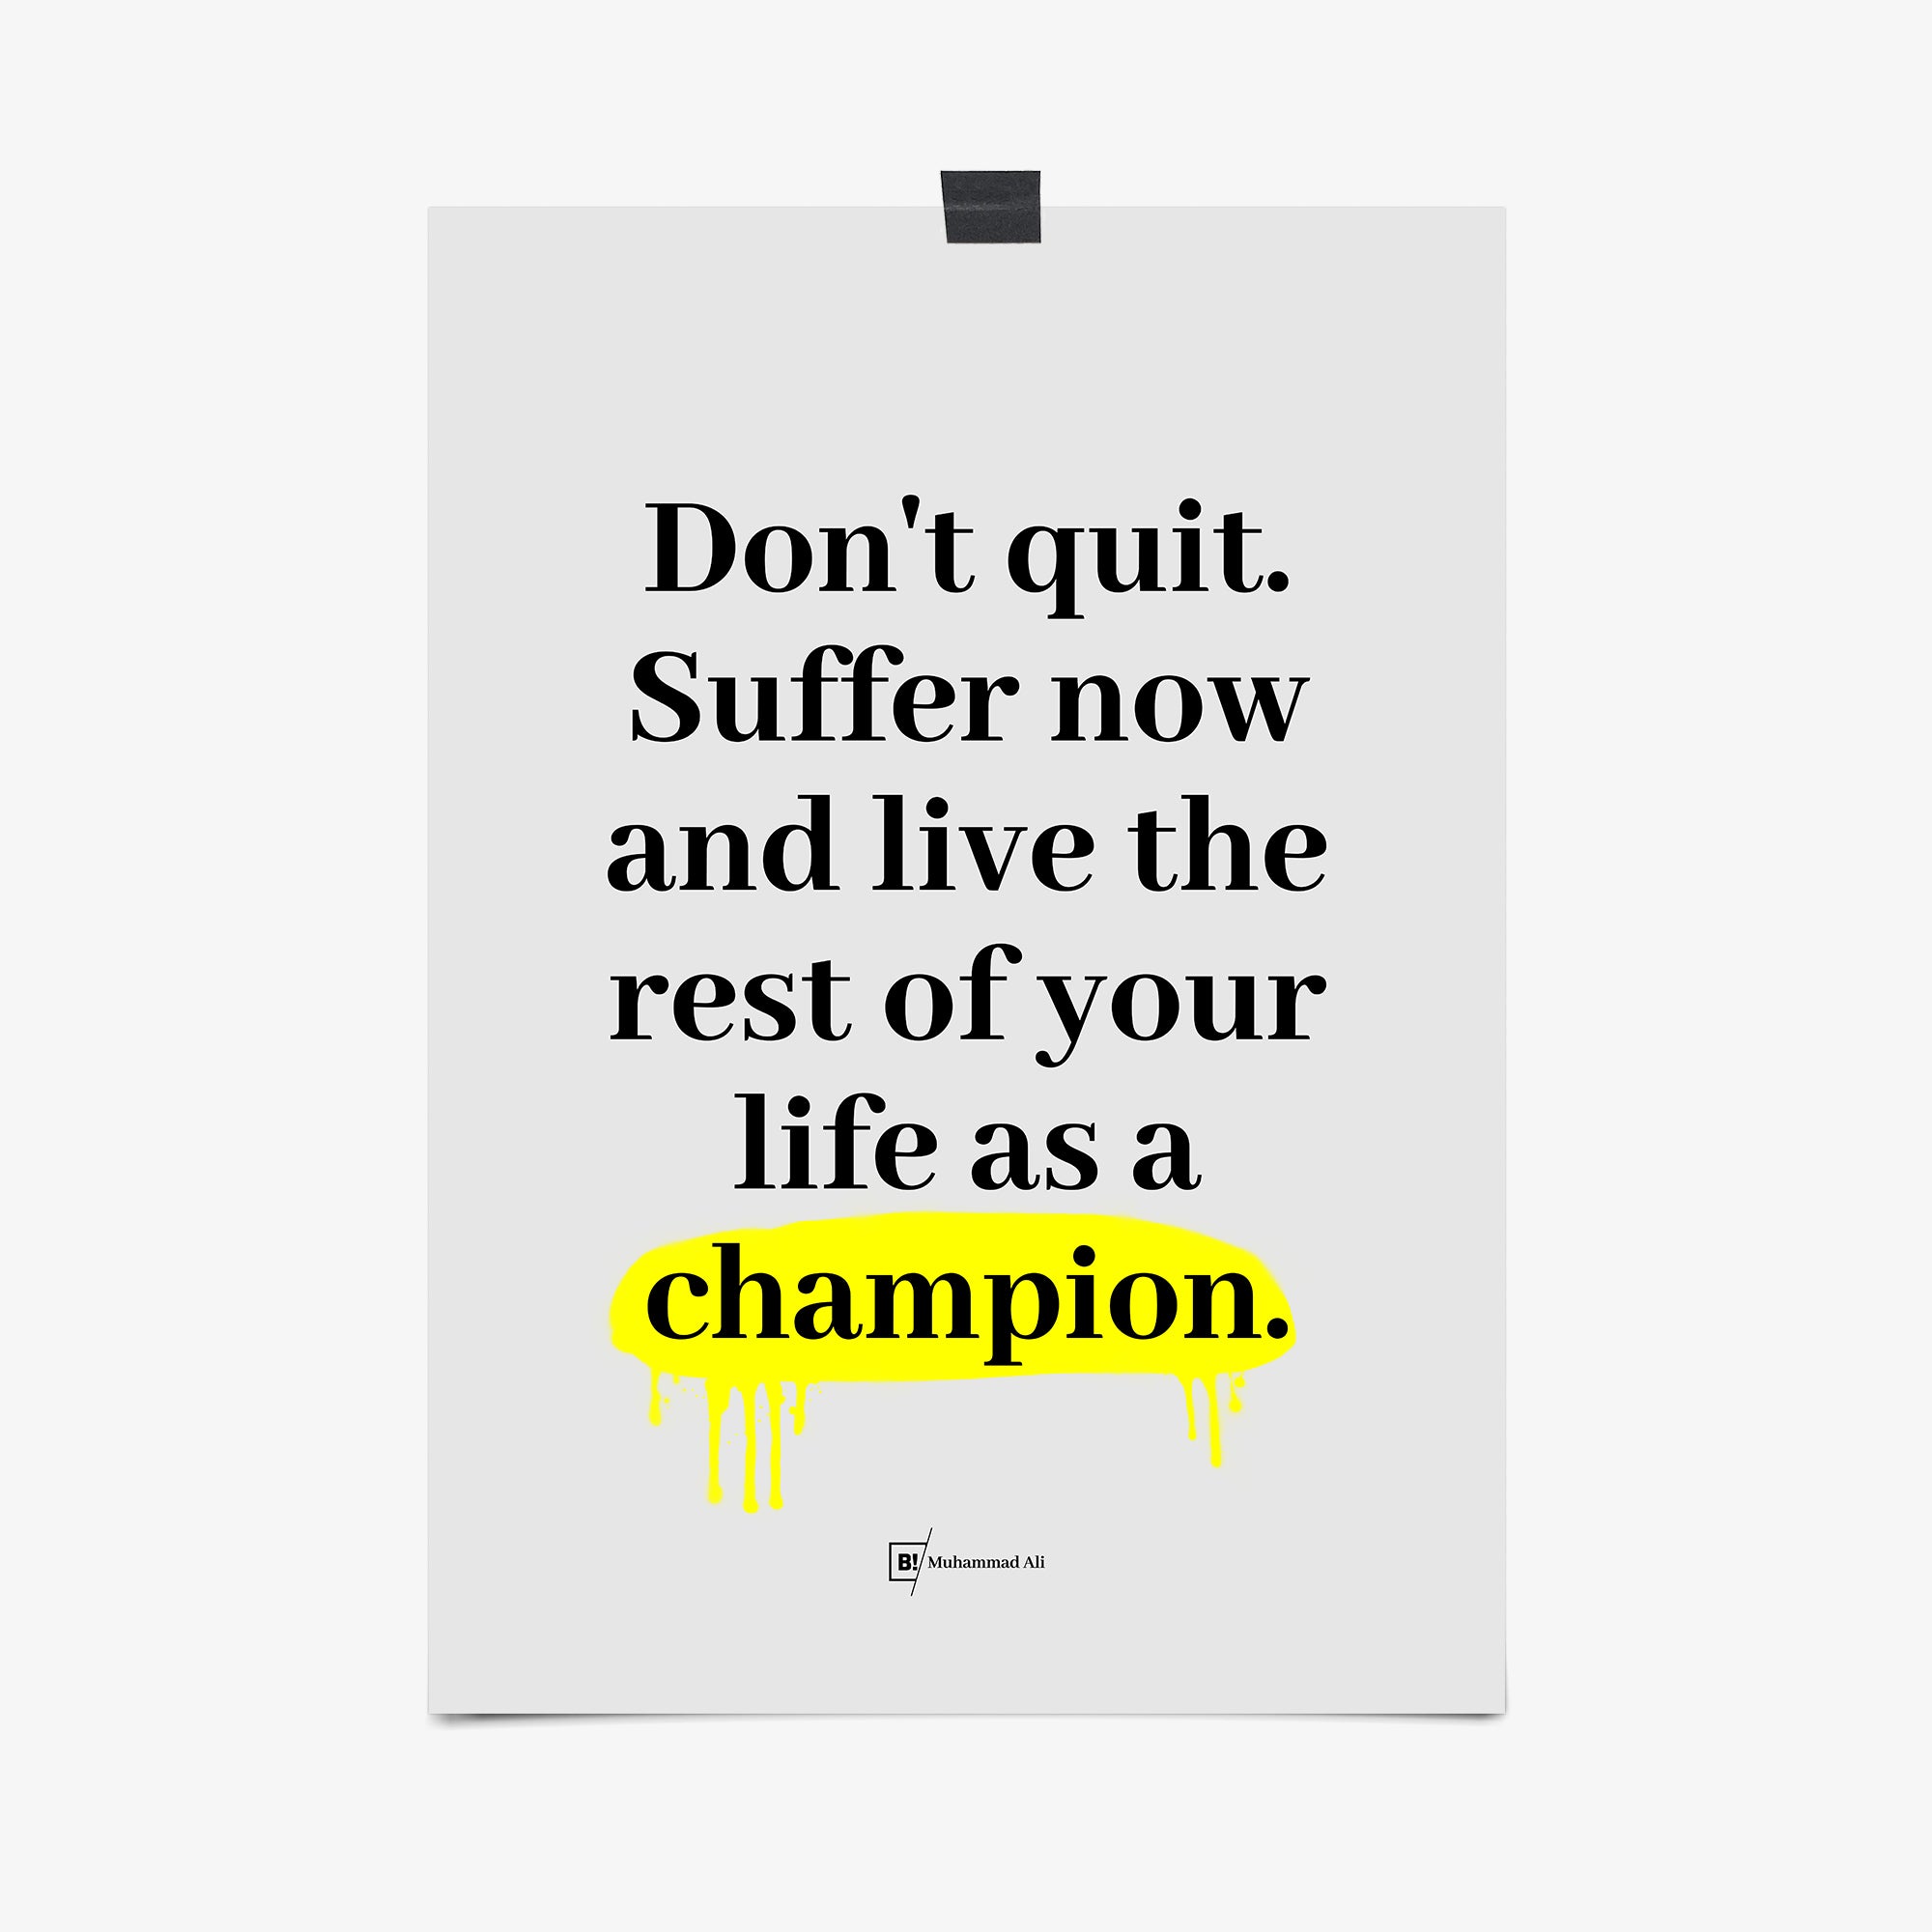 Be inspired by Muhammad Ali's famous "Don't quit. Suffer now and live the rest of your life as a champion" quote art print. This artwork was printed using the giclée process on archival acid-free paper that captures its timeless beauty in every detail.